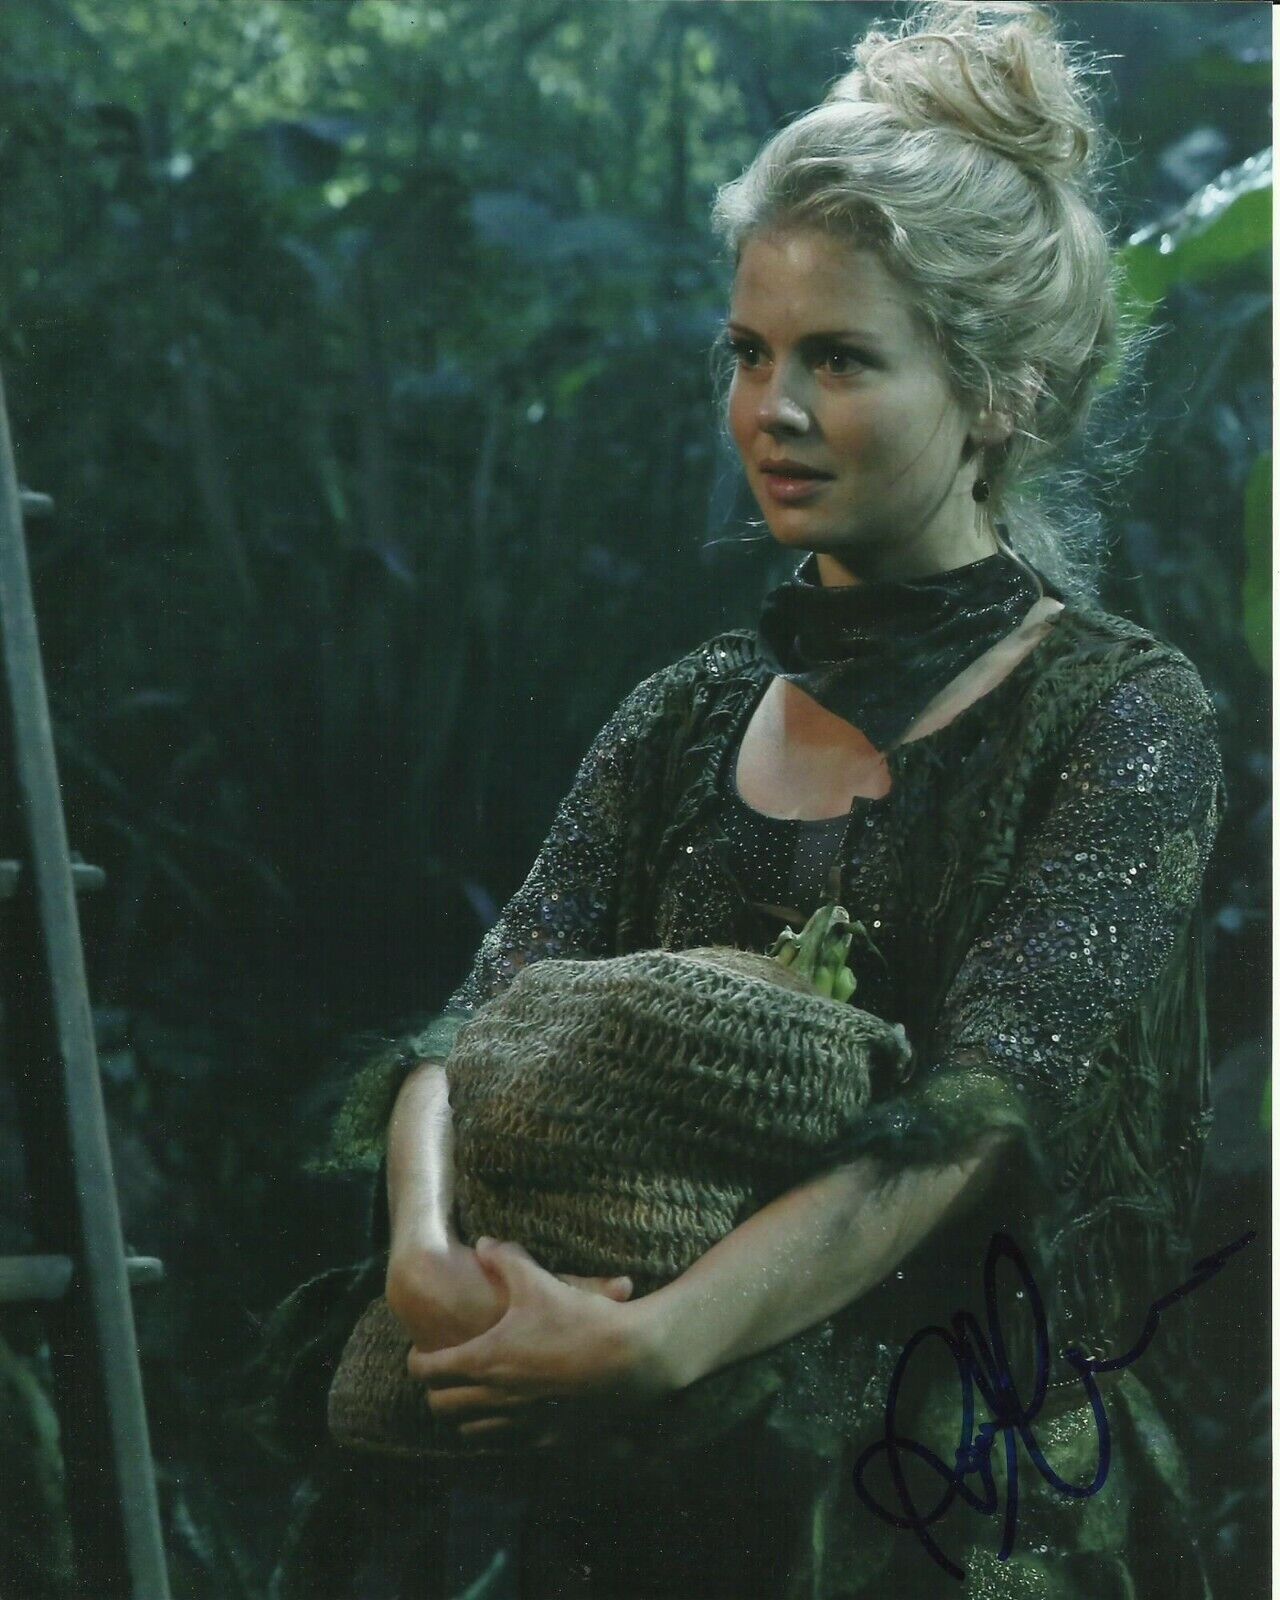 ROSE McIVER SIGNED ONCE UPON A TIME Photo Poster painting UACC REG 242 (1)